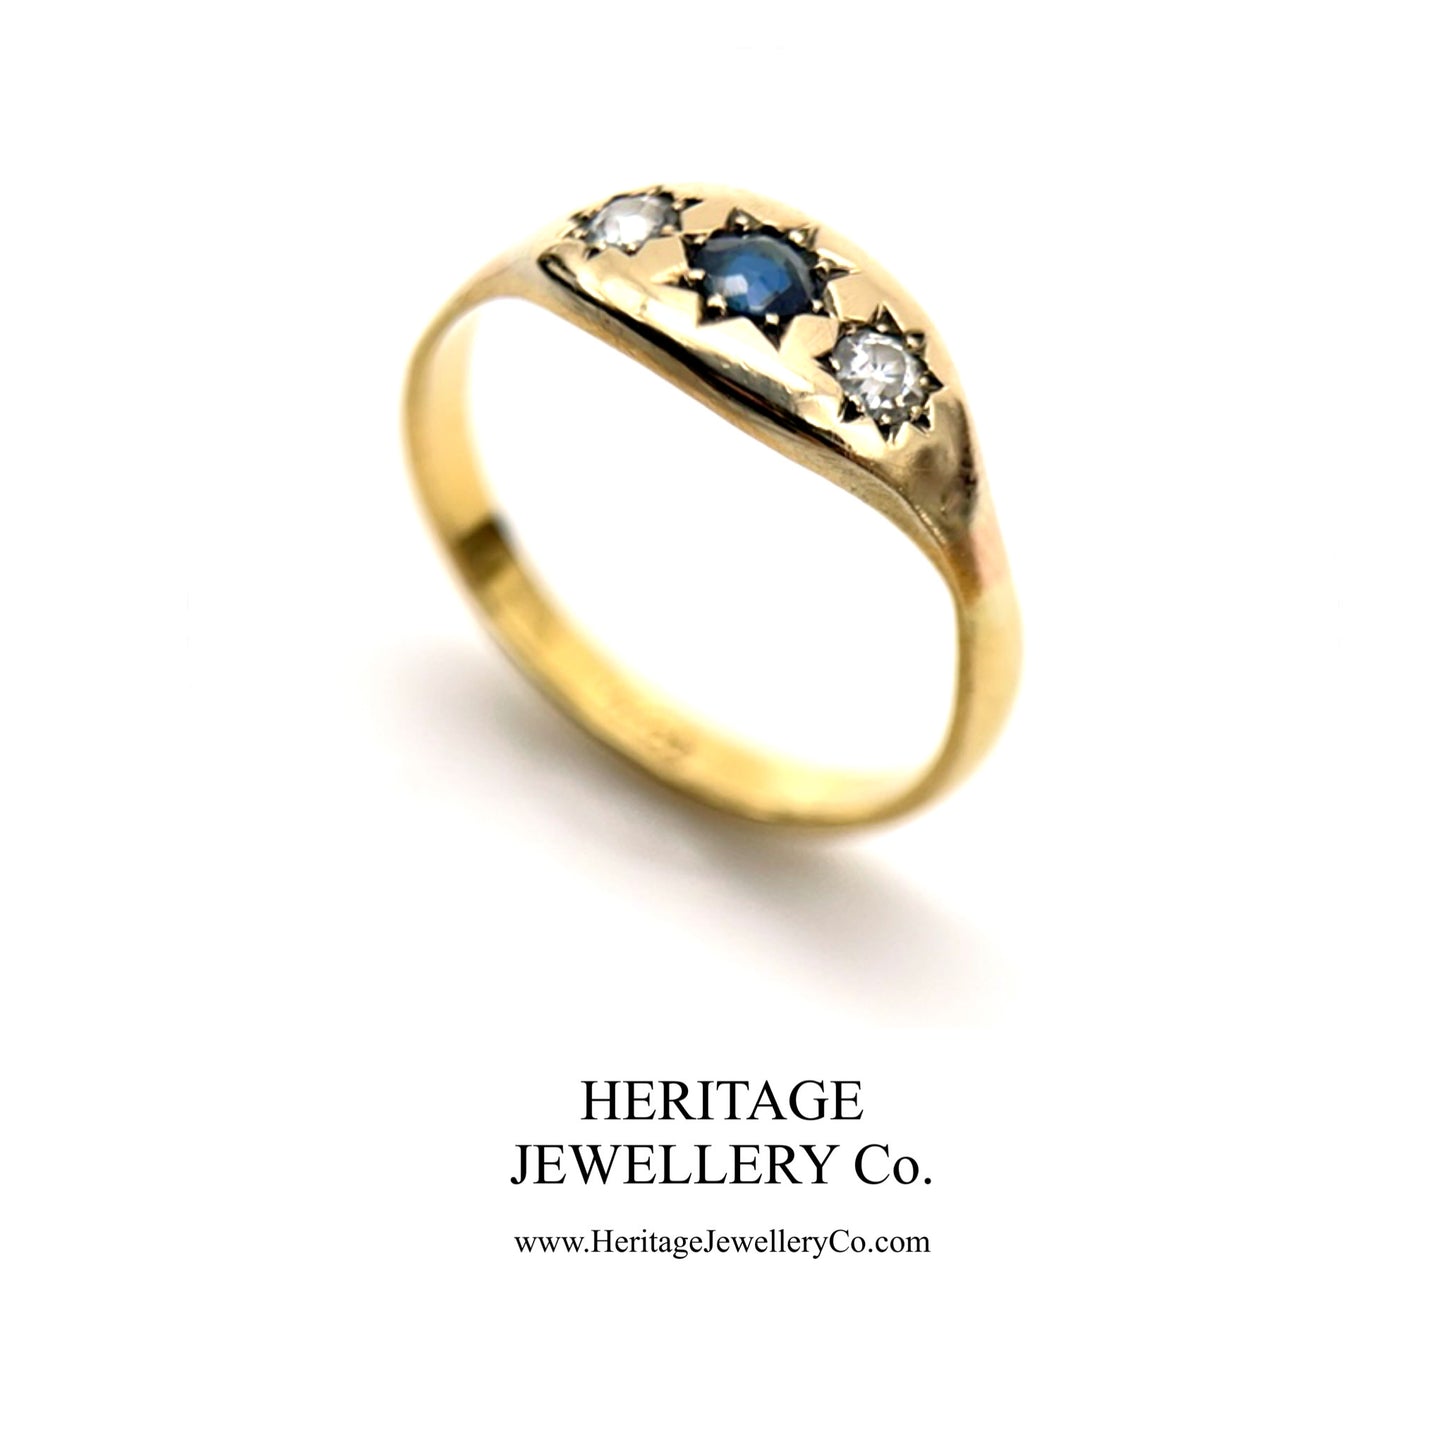 Antique Sapphire and Diamond Gypsy Ring (c. 1890-1900)